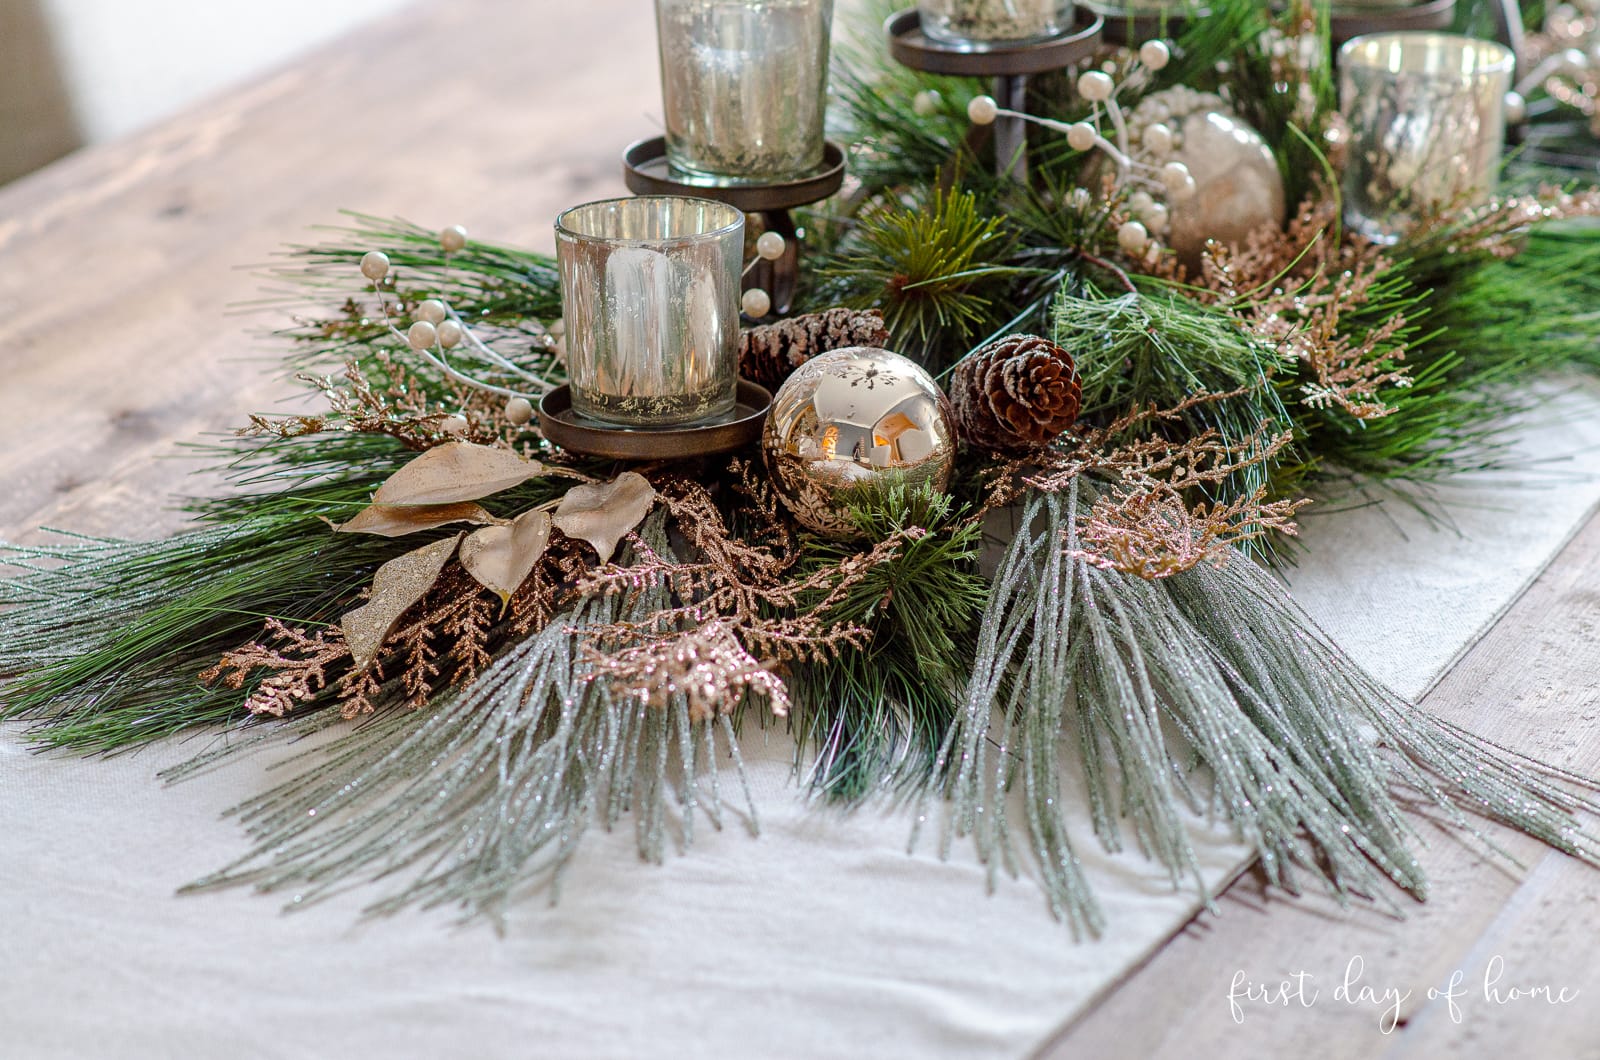 DIY holiday table centerpiece with mixed greenery, mercury glass candleholders, metallic ornaments, and faux floral accents.